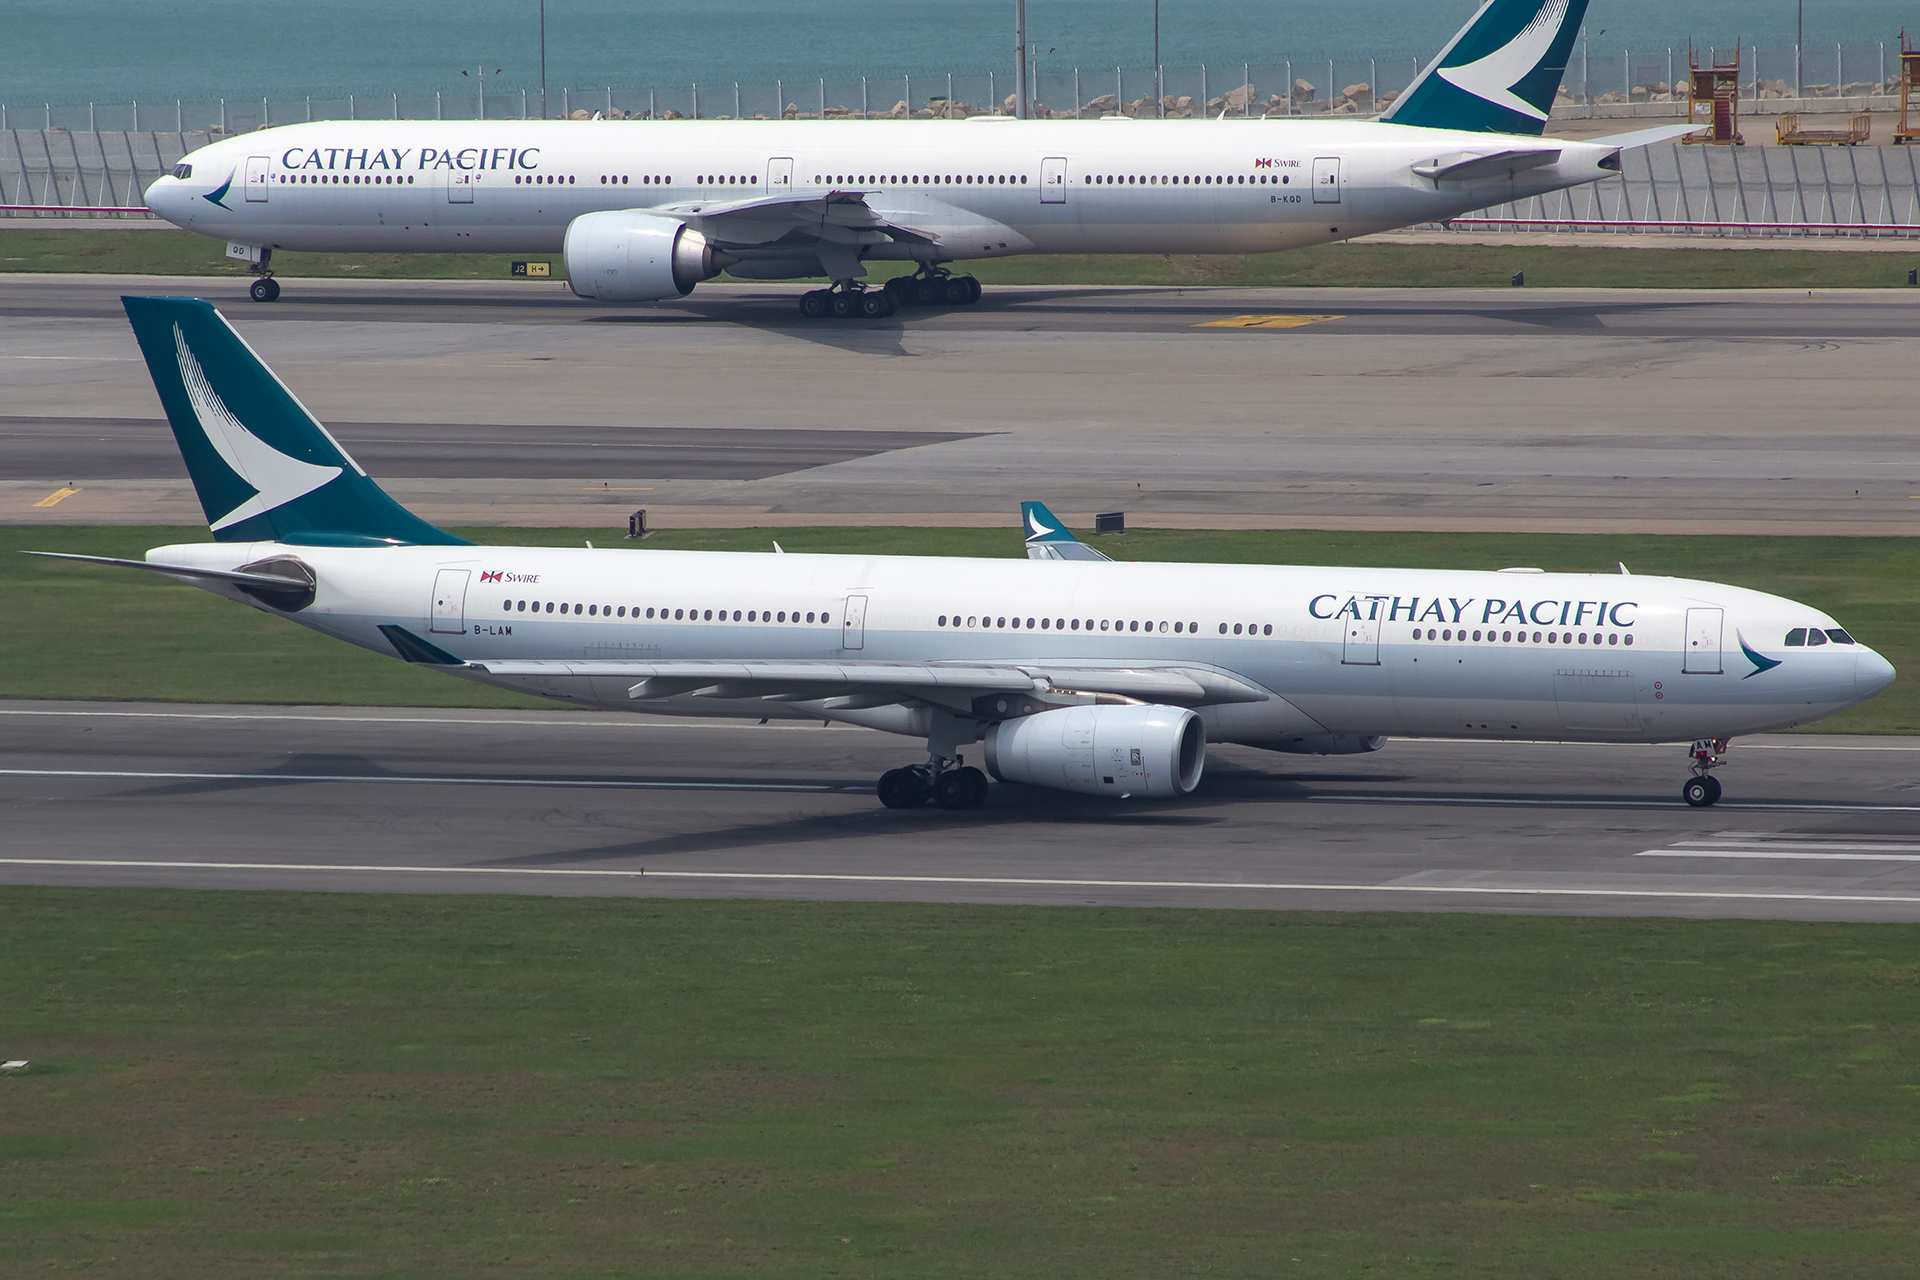 B-LAM/BLAM Cathay Pacific Airways Airbus A330 Airframe Information - AVSpotters.com